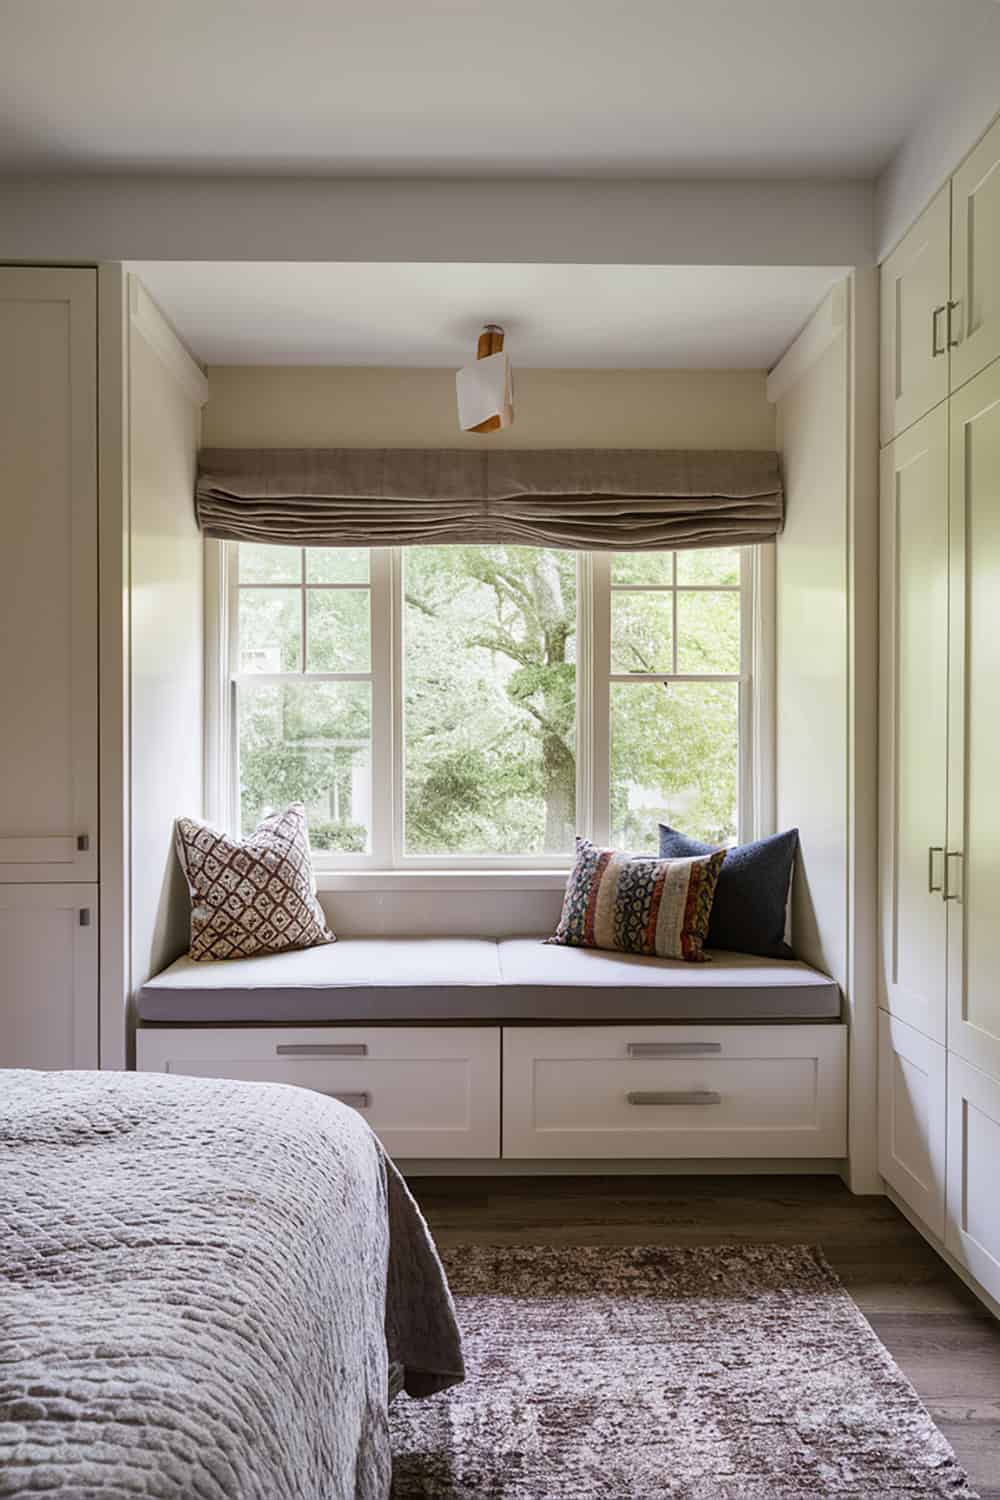 Window Seat with Built In Storage Drawers